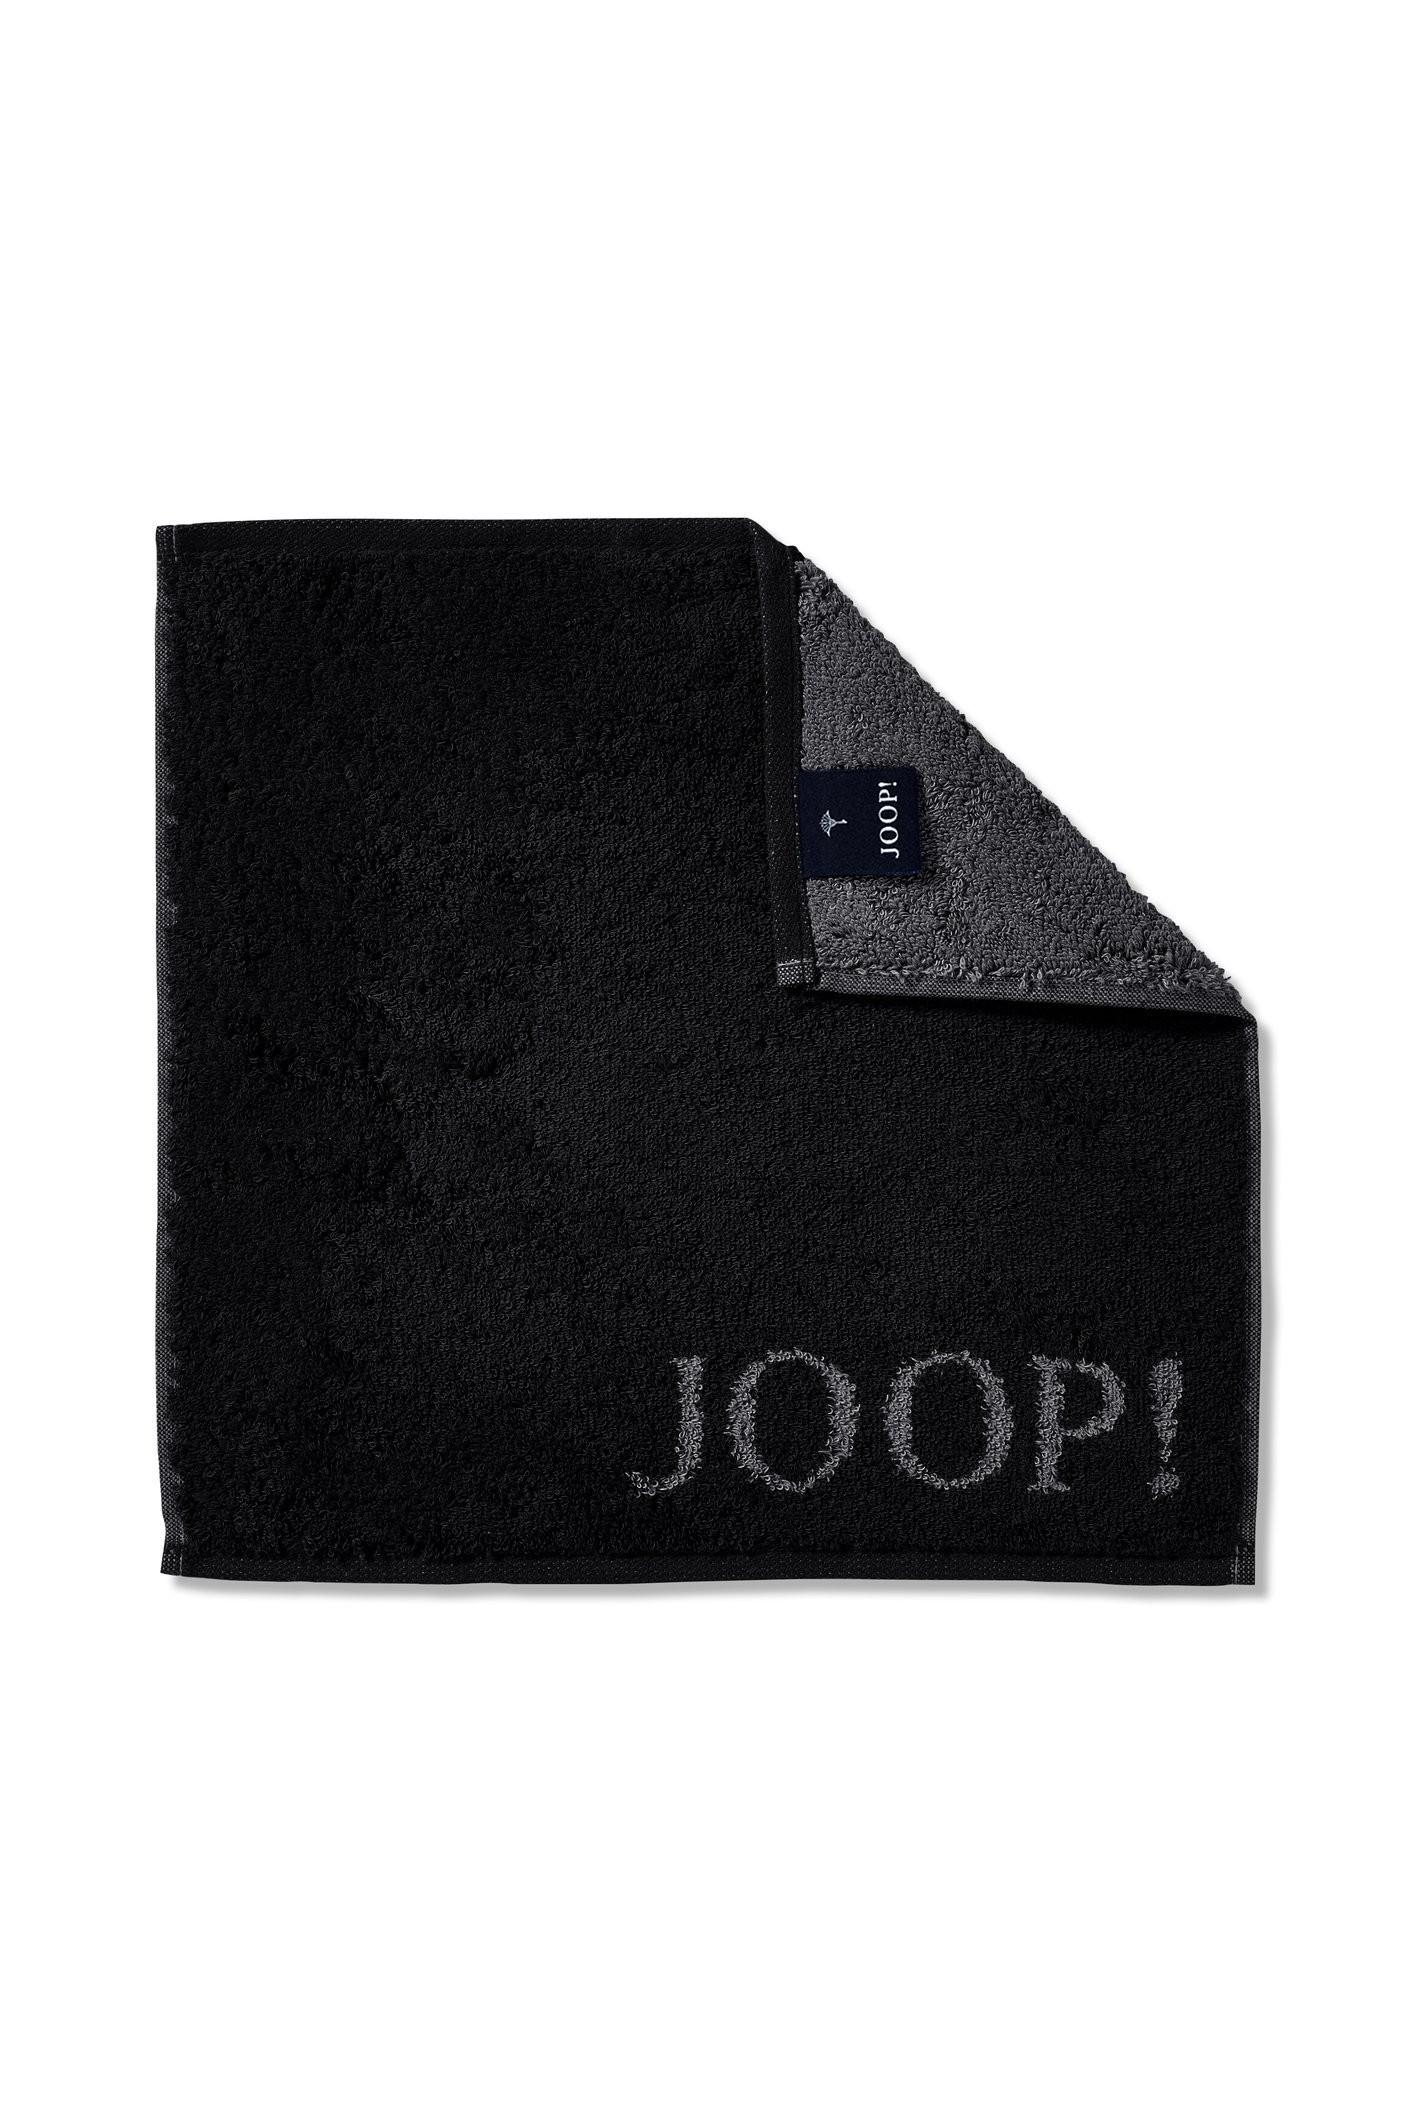 JOOP! Seiftuch CLASSIC